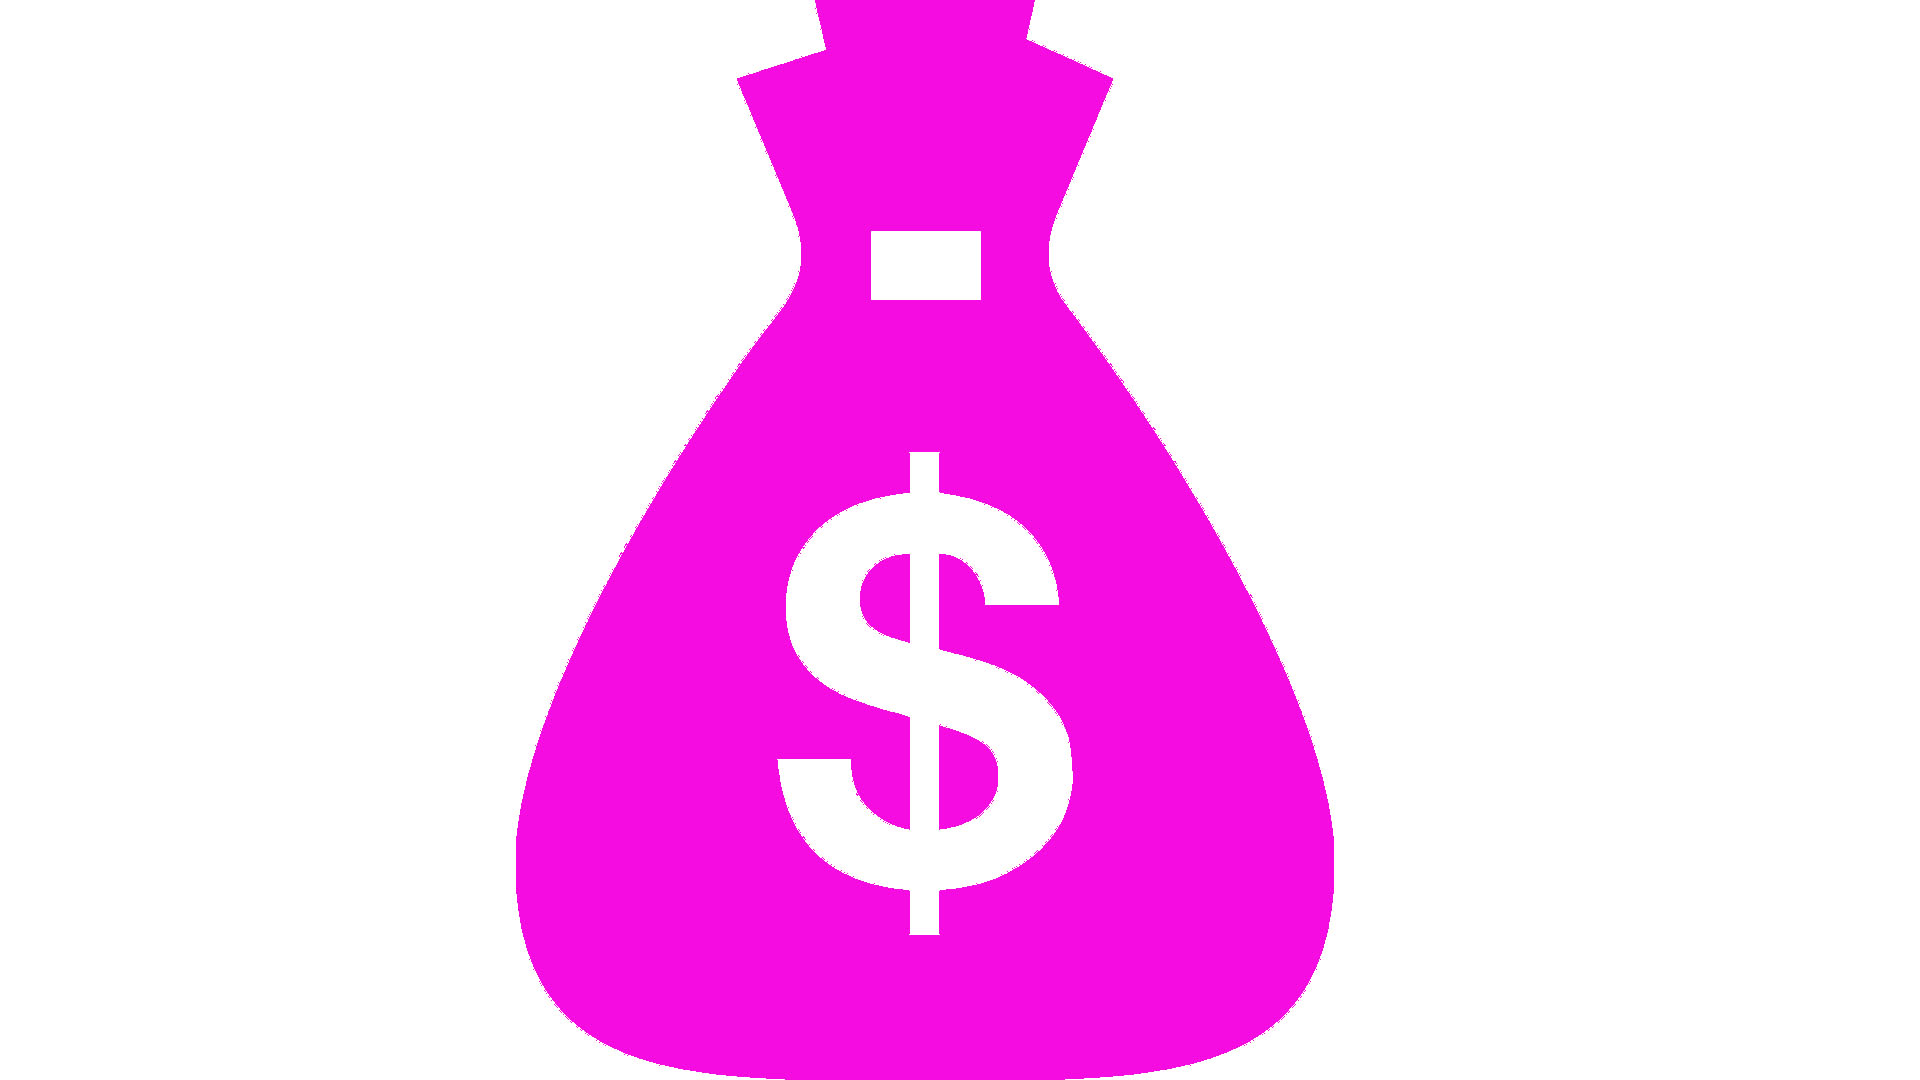 GRAPHIC: Pink money bag with dollar sign. Graphic by The Signal reporter Sarah Daniels; elements from Pixabay.